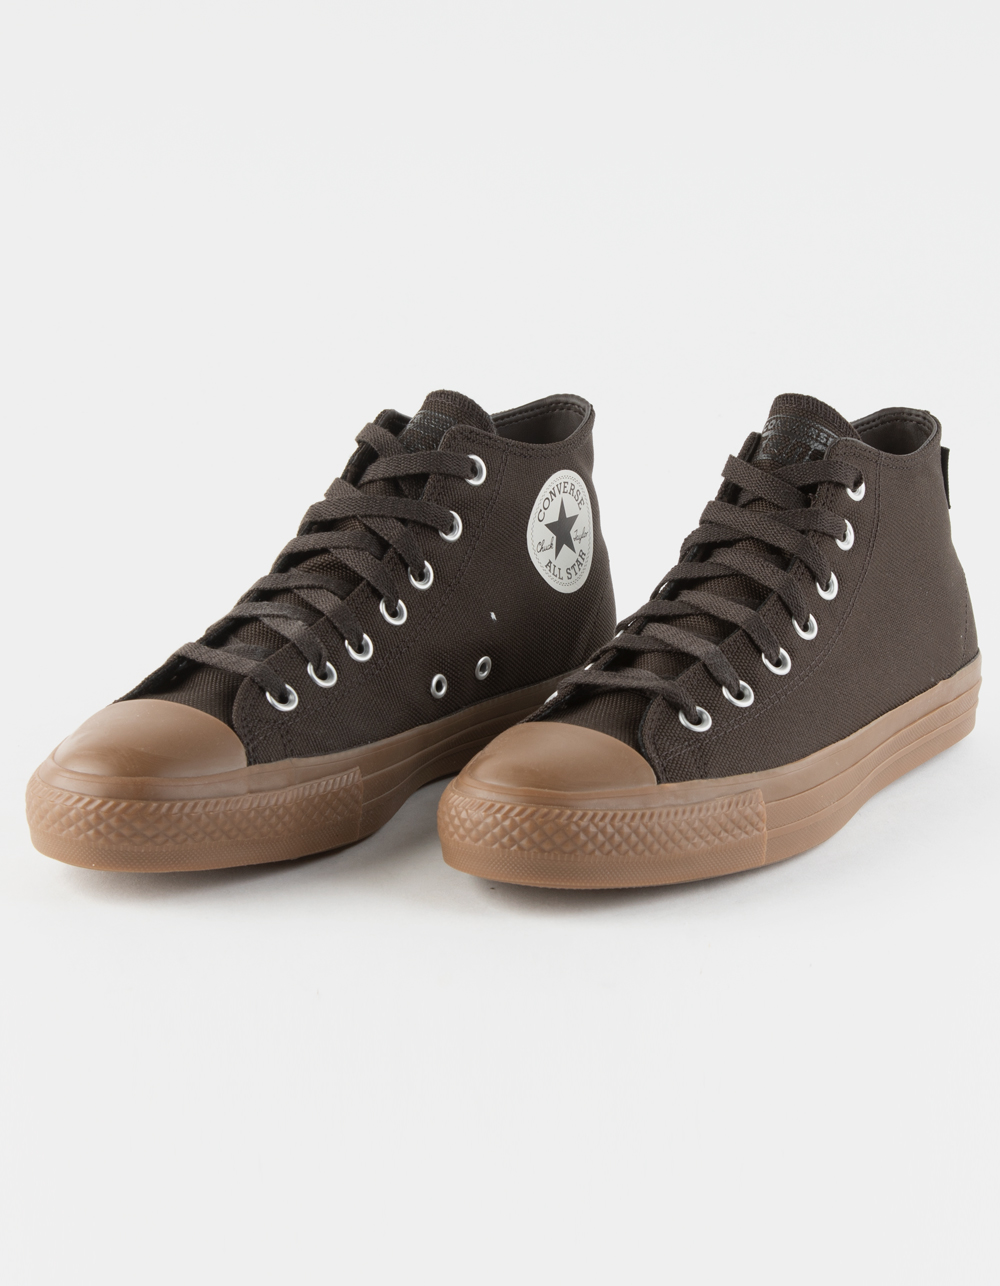 CONVERSE Chuck Taylor Star Pro Mid Shoes - BROWN |